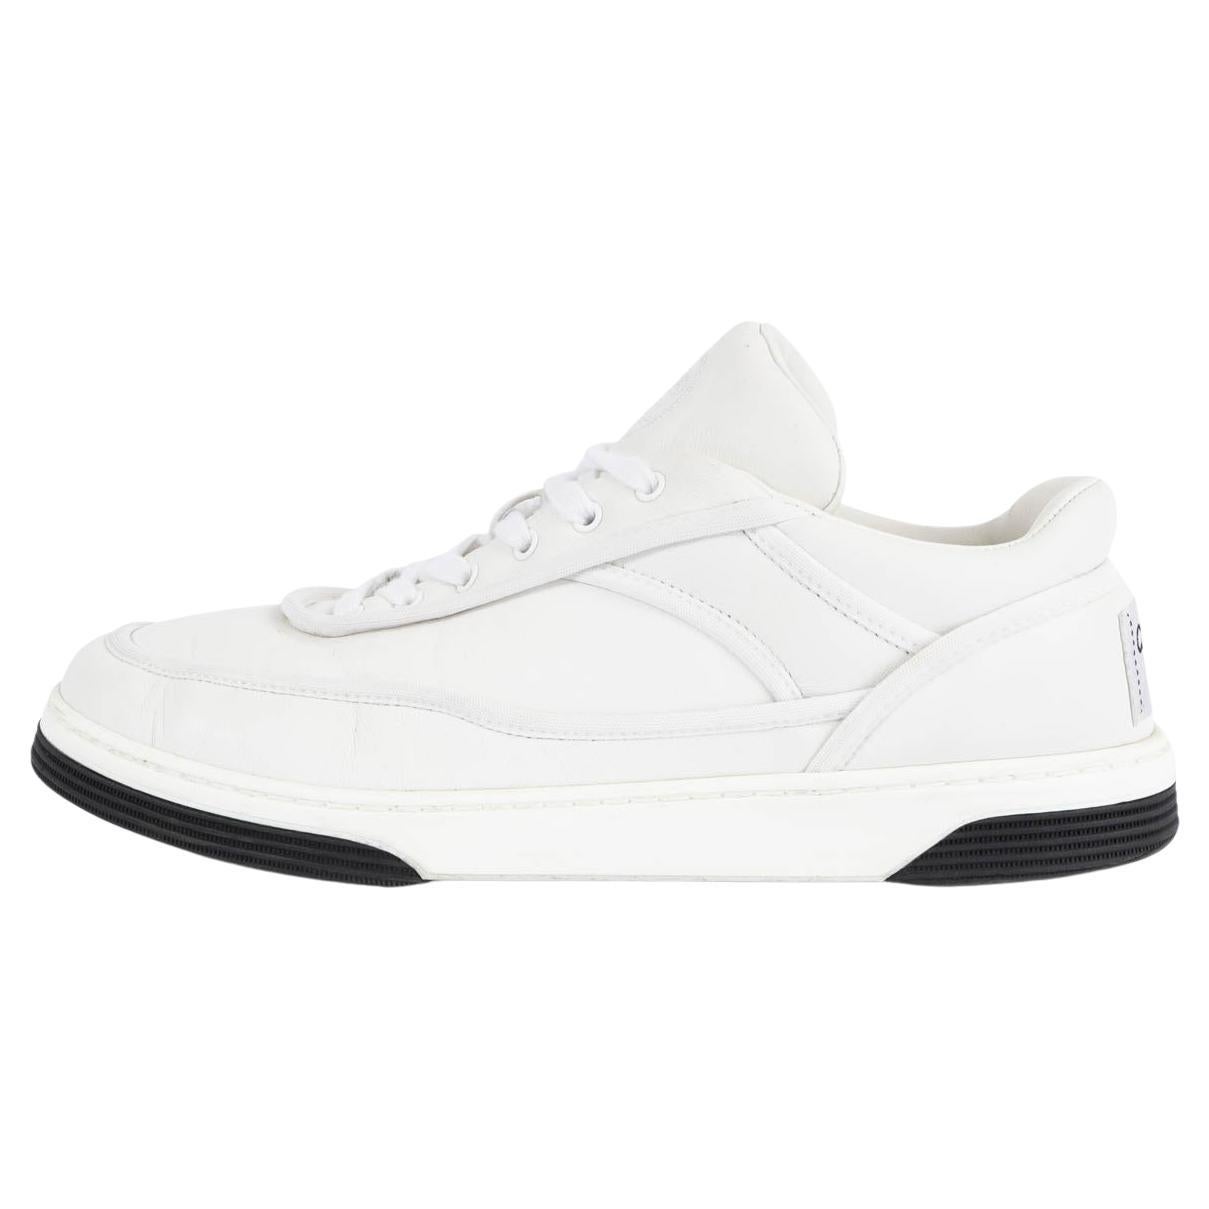 Chanel 2021 Low-Top Sneakers White 38.5 G37488 21S